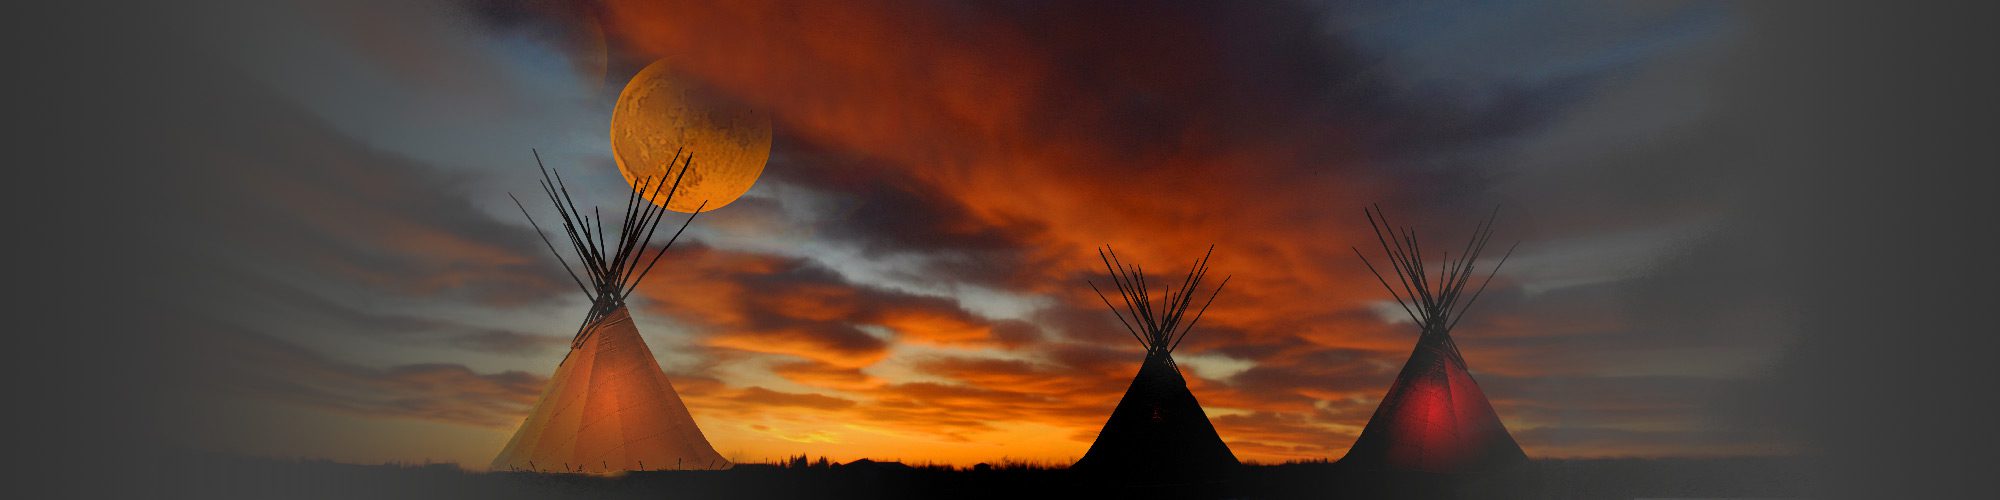 Indian Lands Working Group - sunset image with teepees